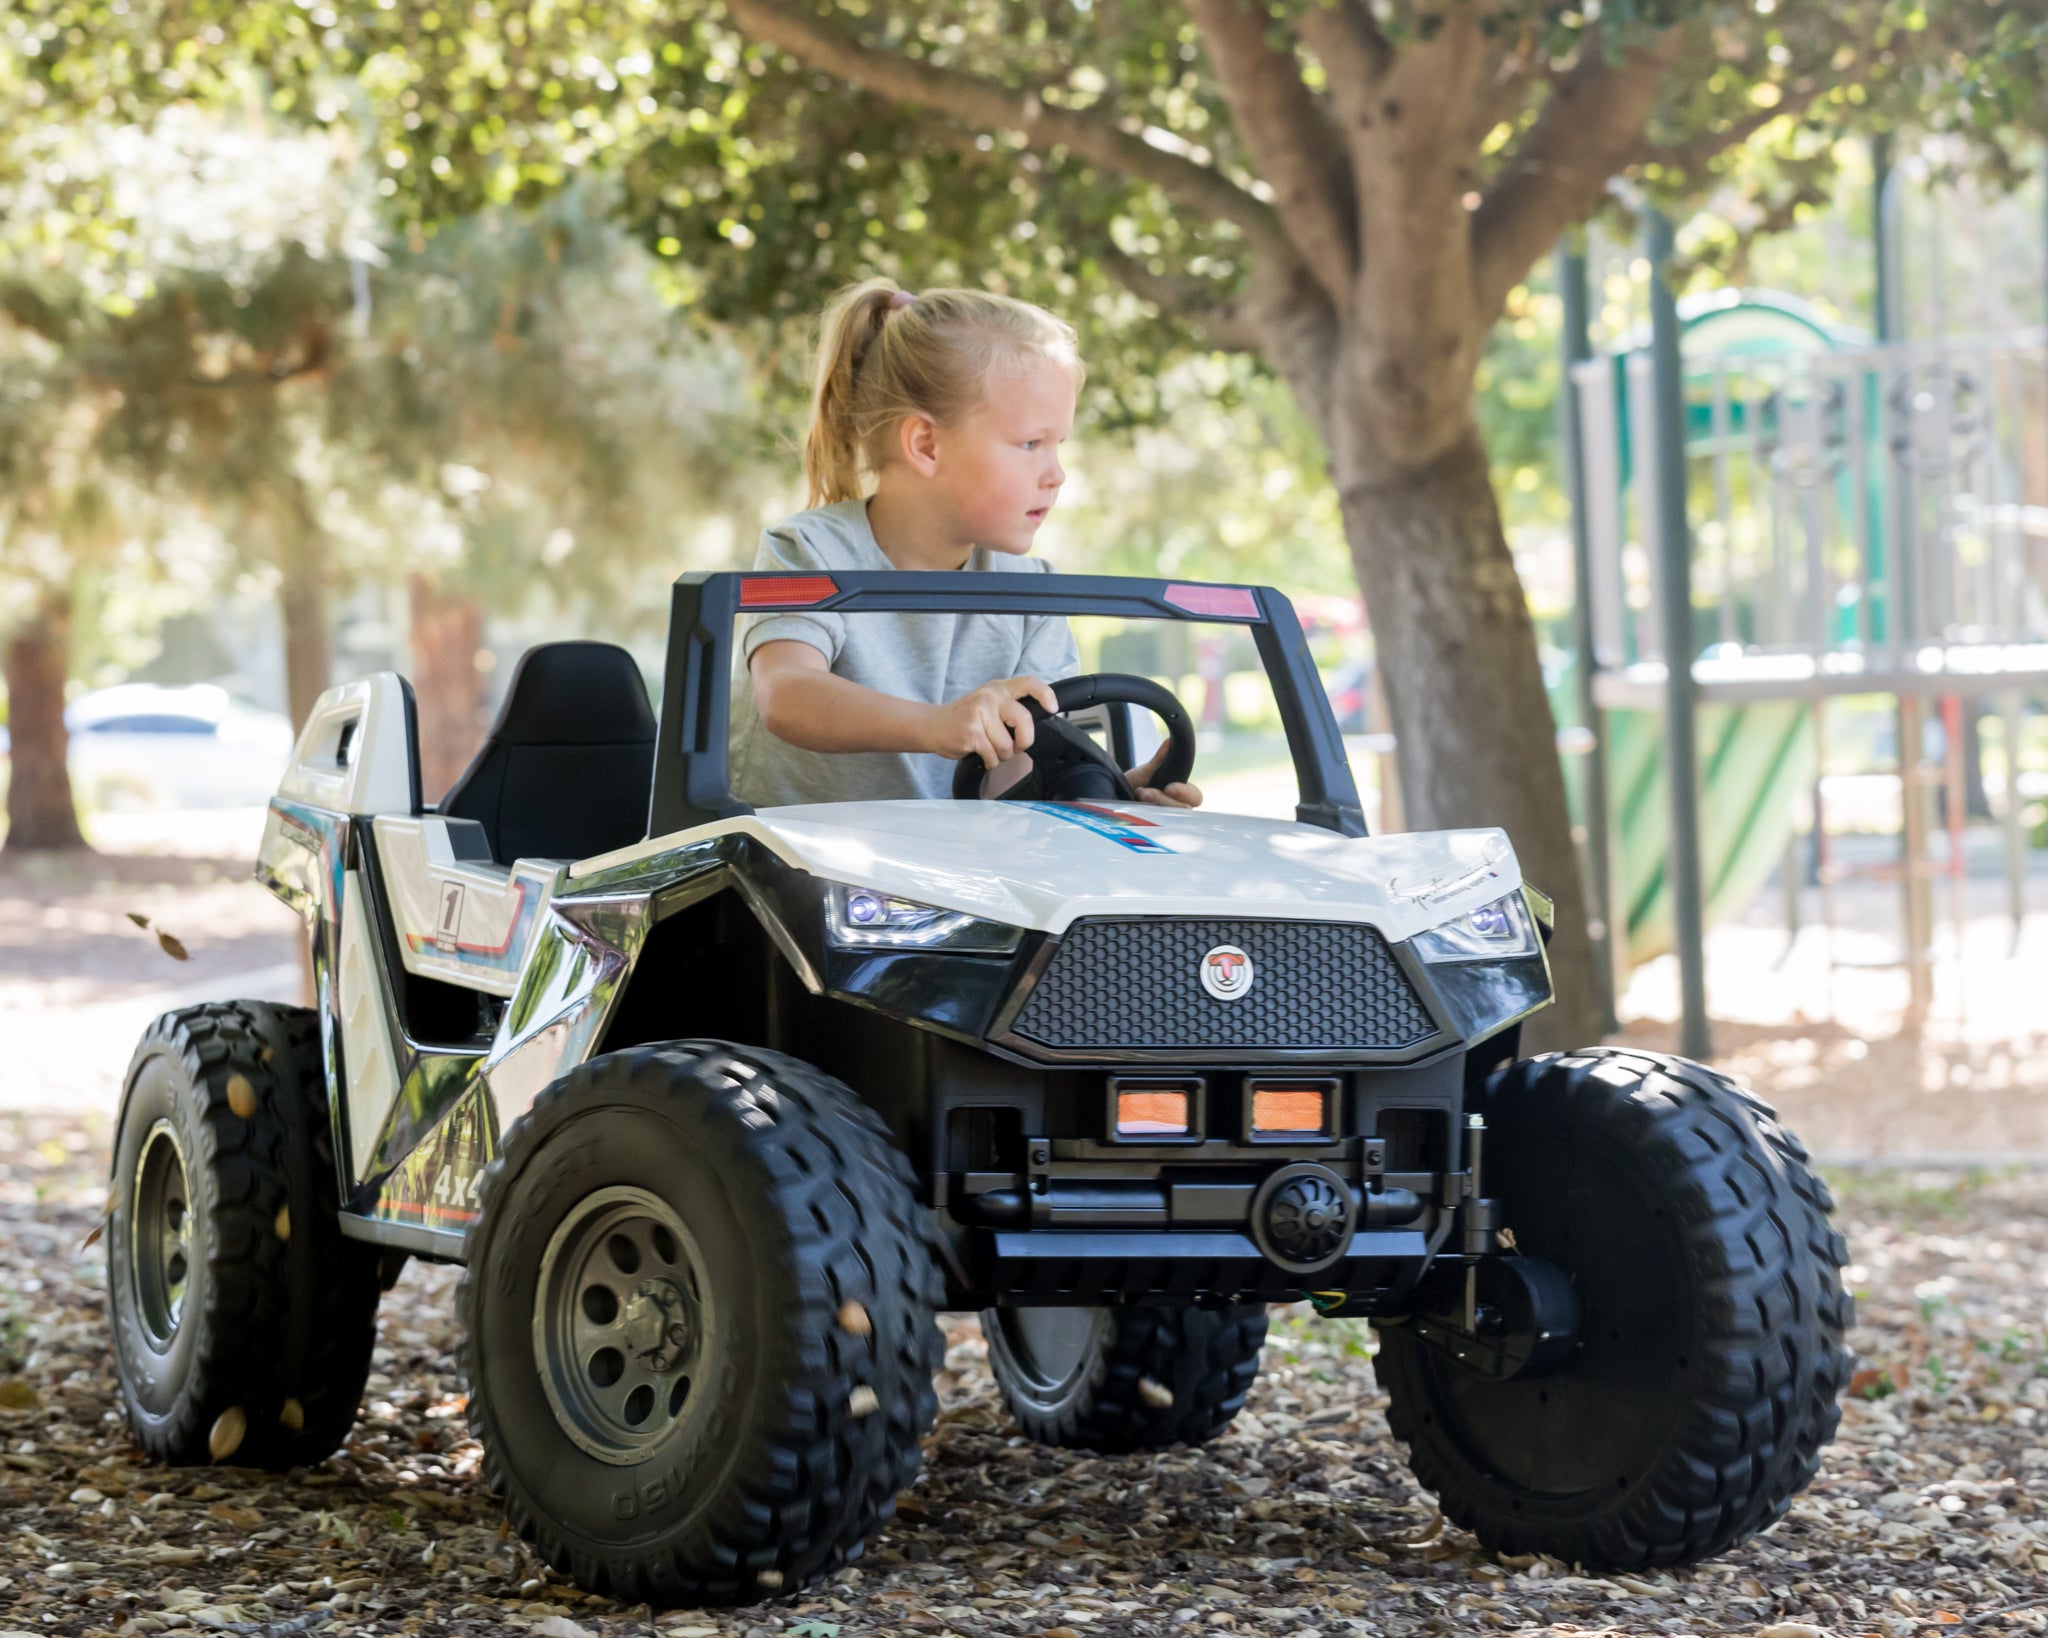 Step-by-Step Setup Guide: Getting the Most Out of Power Wheels with Remote